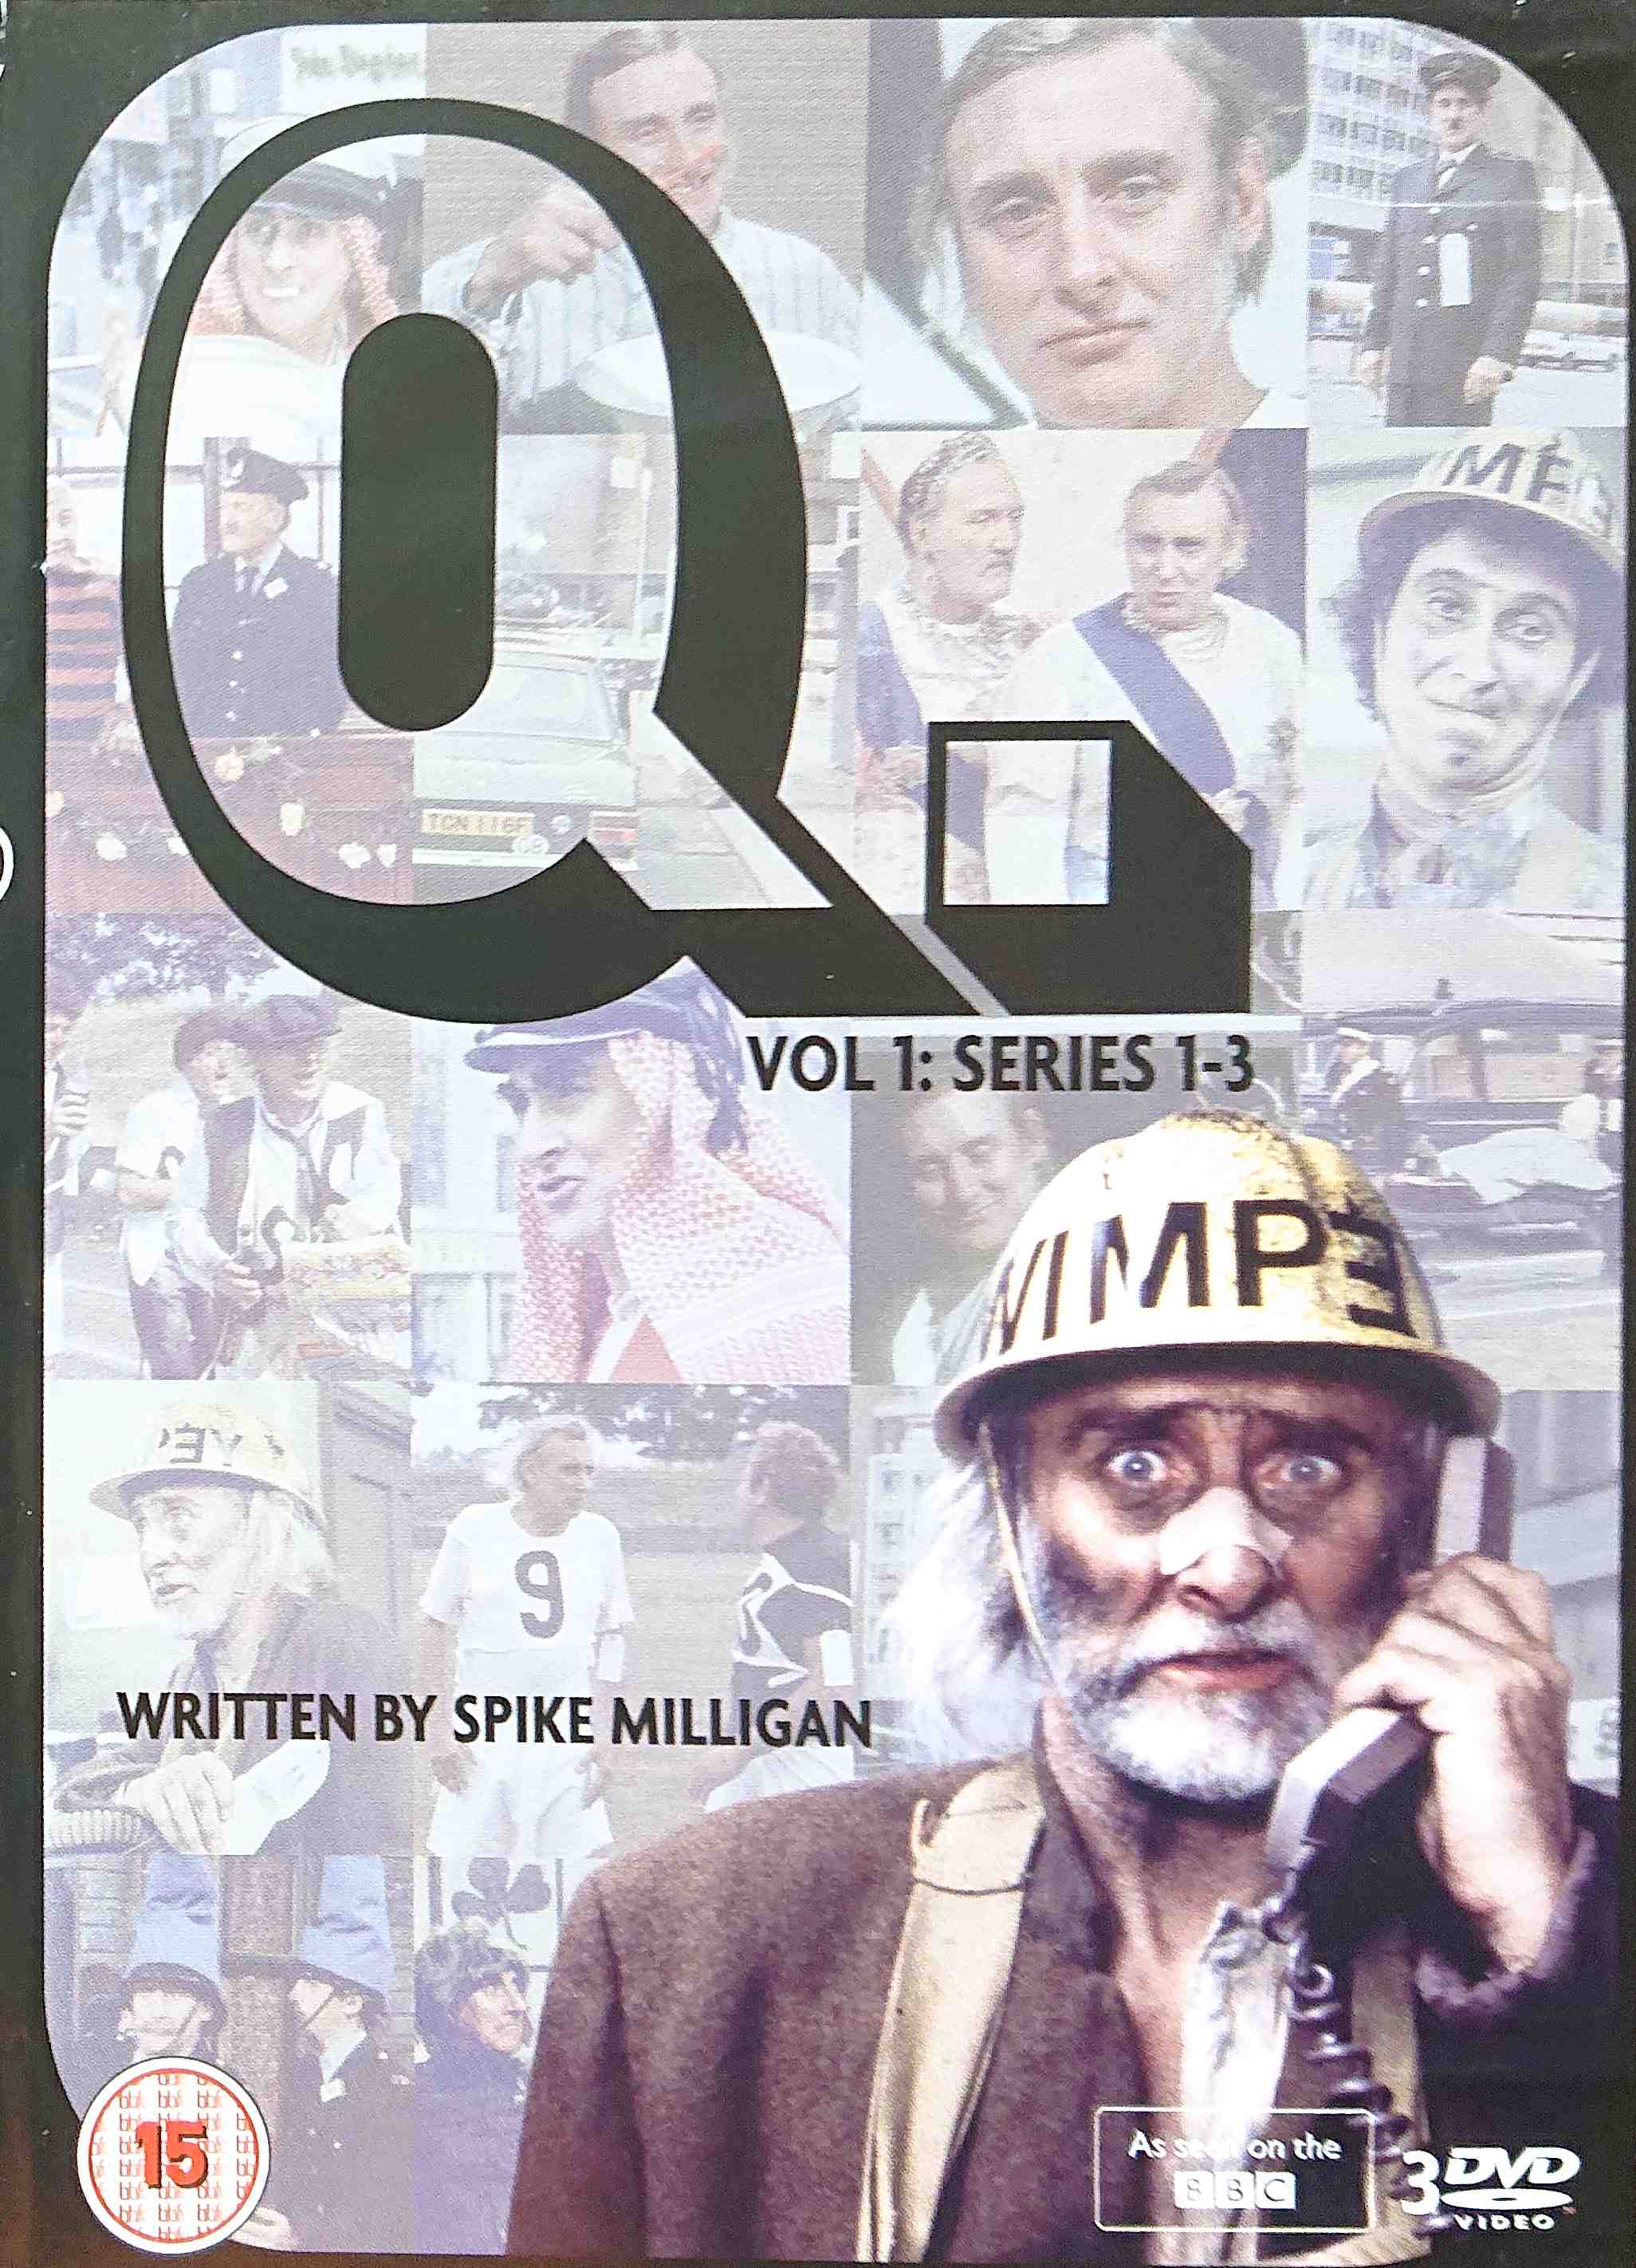 Picture of Q. - Volume 1: Series 1-3 by artist Spike Milligan from the BBC dvds - Records and Tapes library